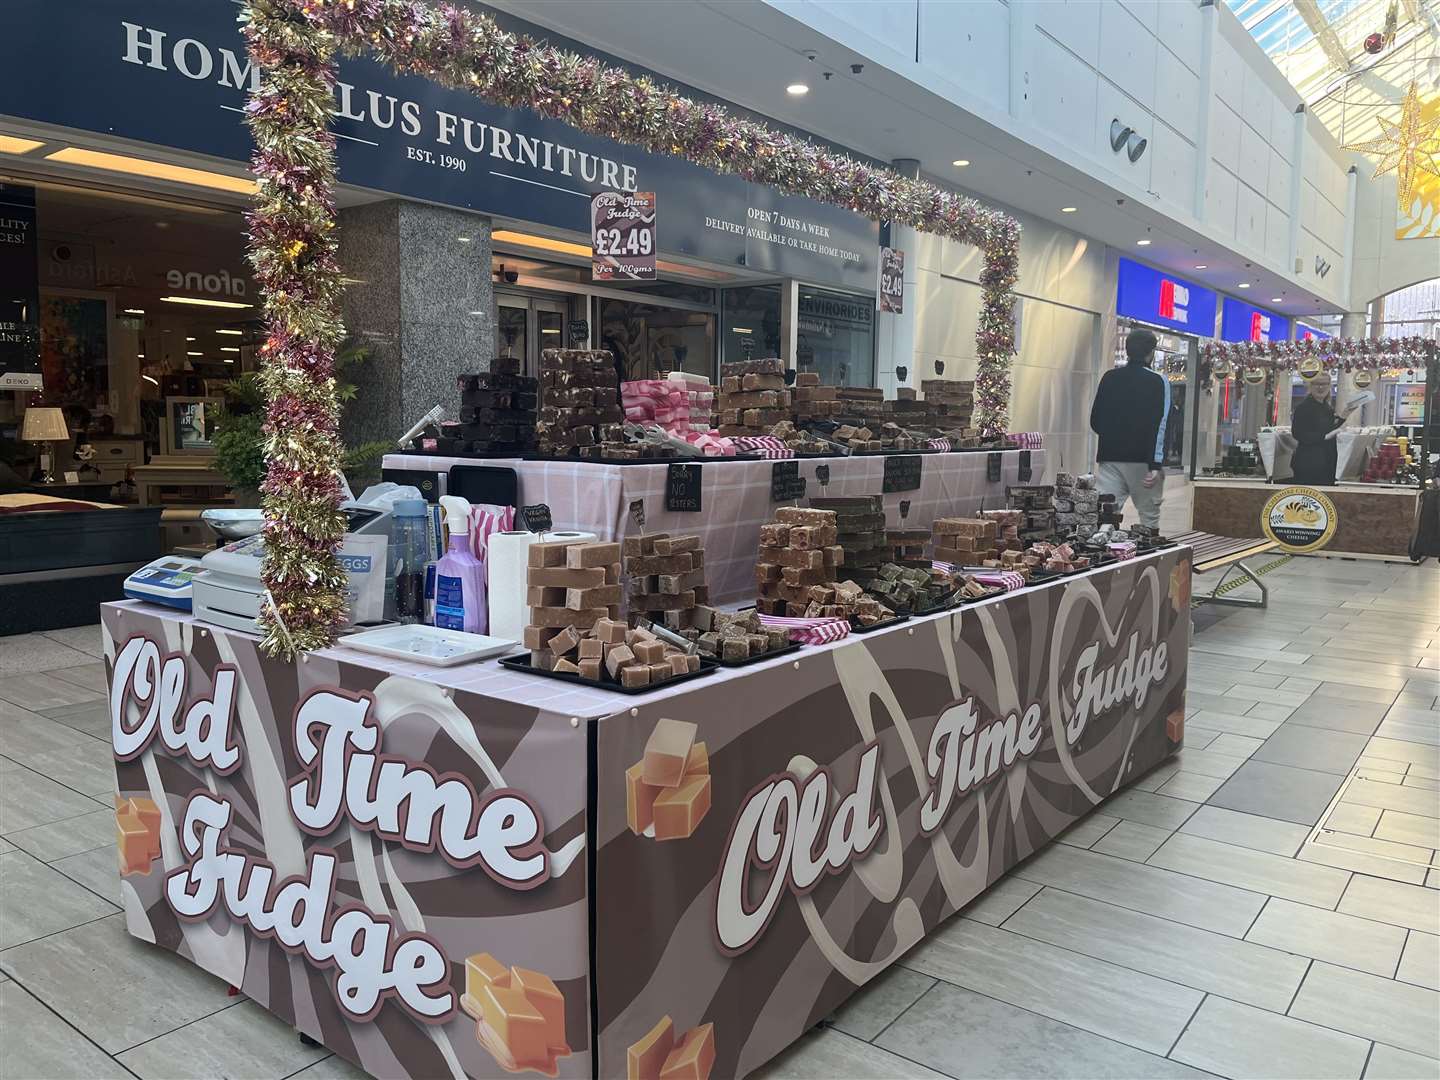 Old Time Fudge is outside HomePlus Furniture